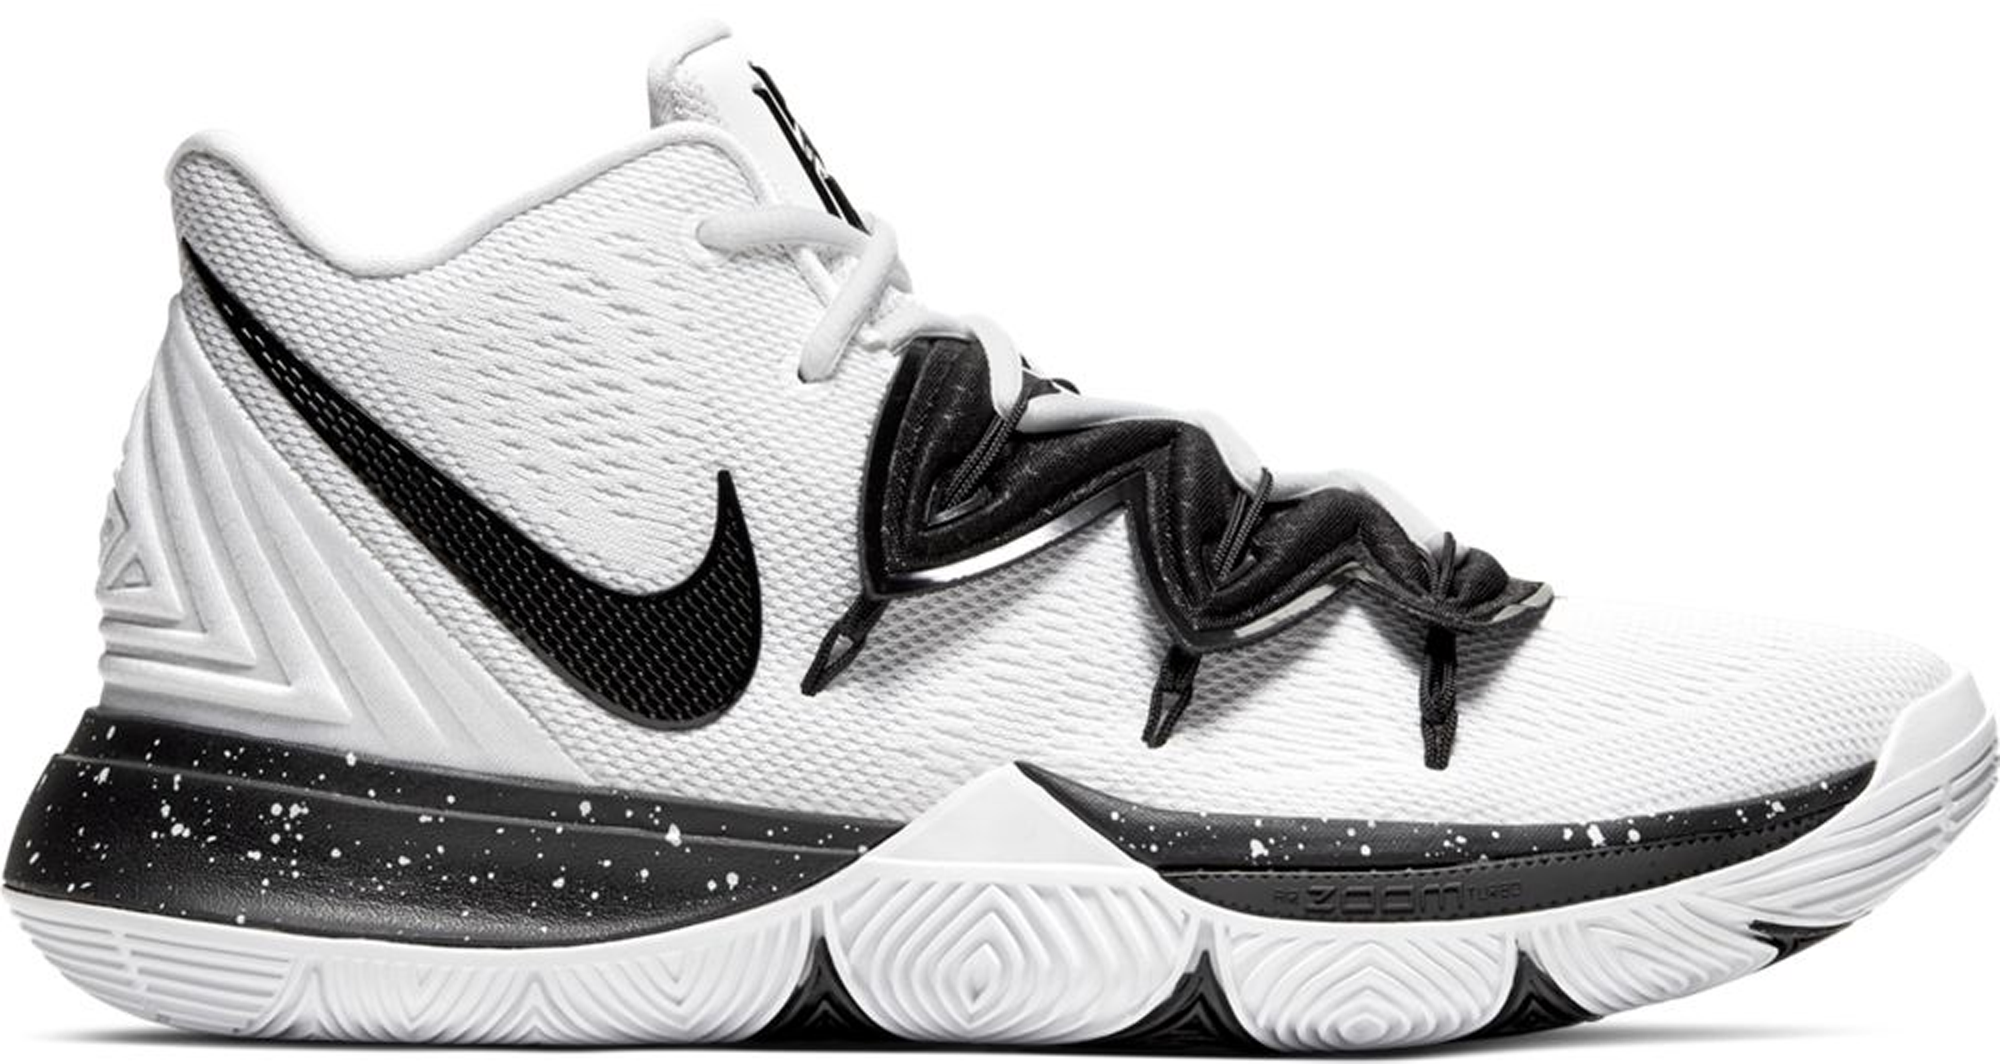 kyrie 5 shoes white